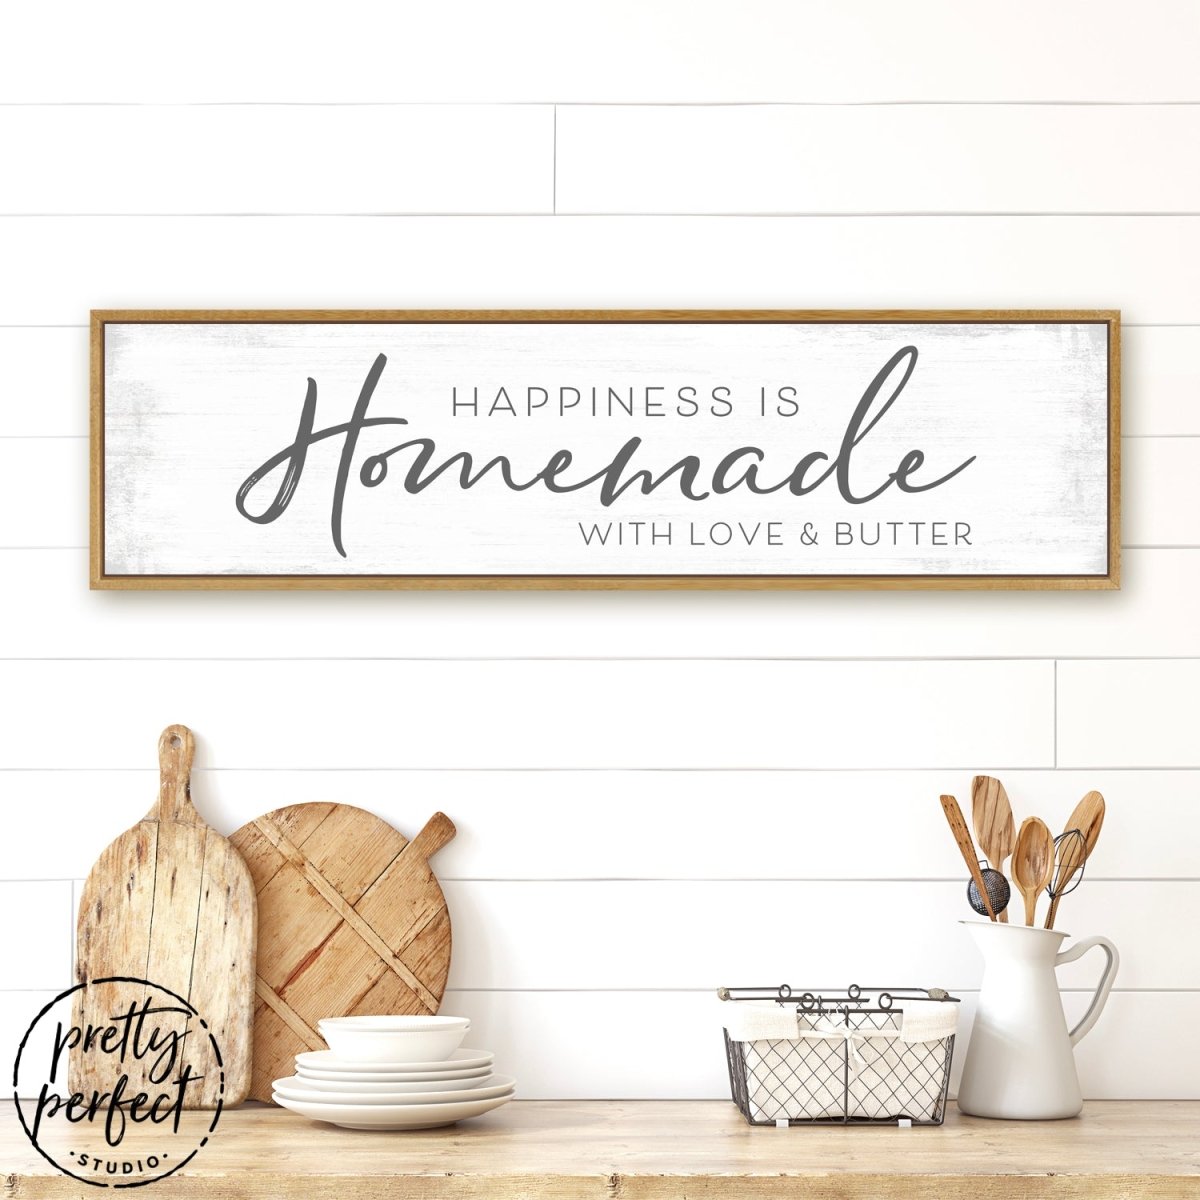 Happiness Is Homemade Sign in Kitchen Pretty Perfect Studio